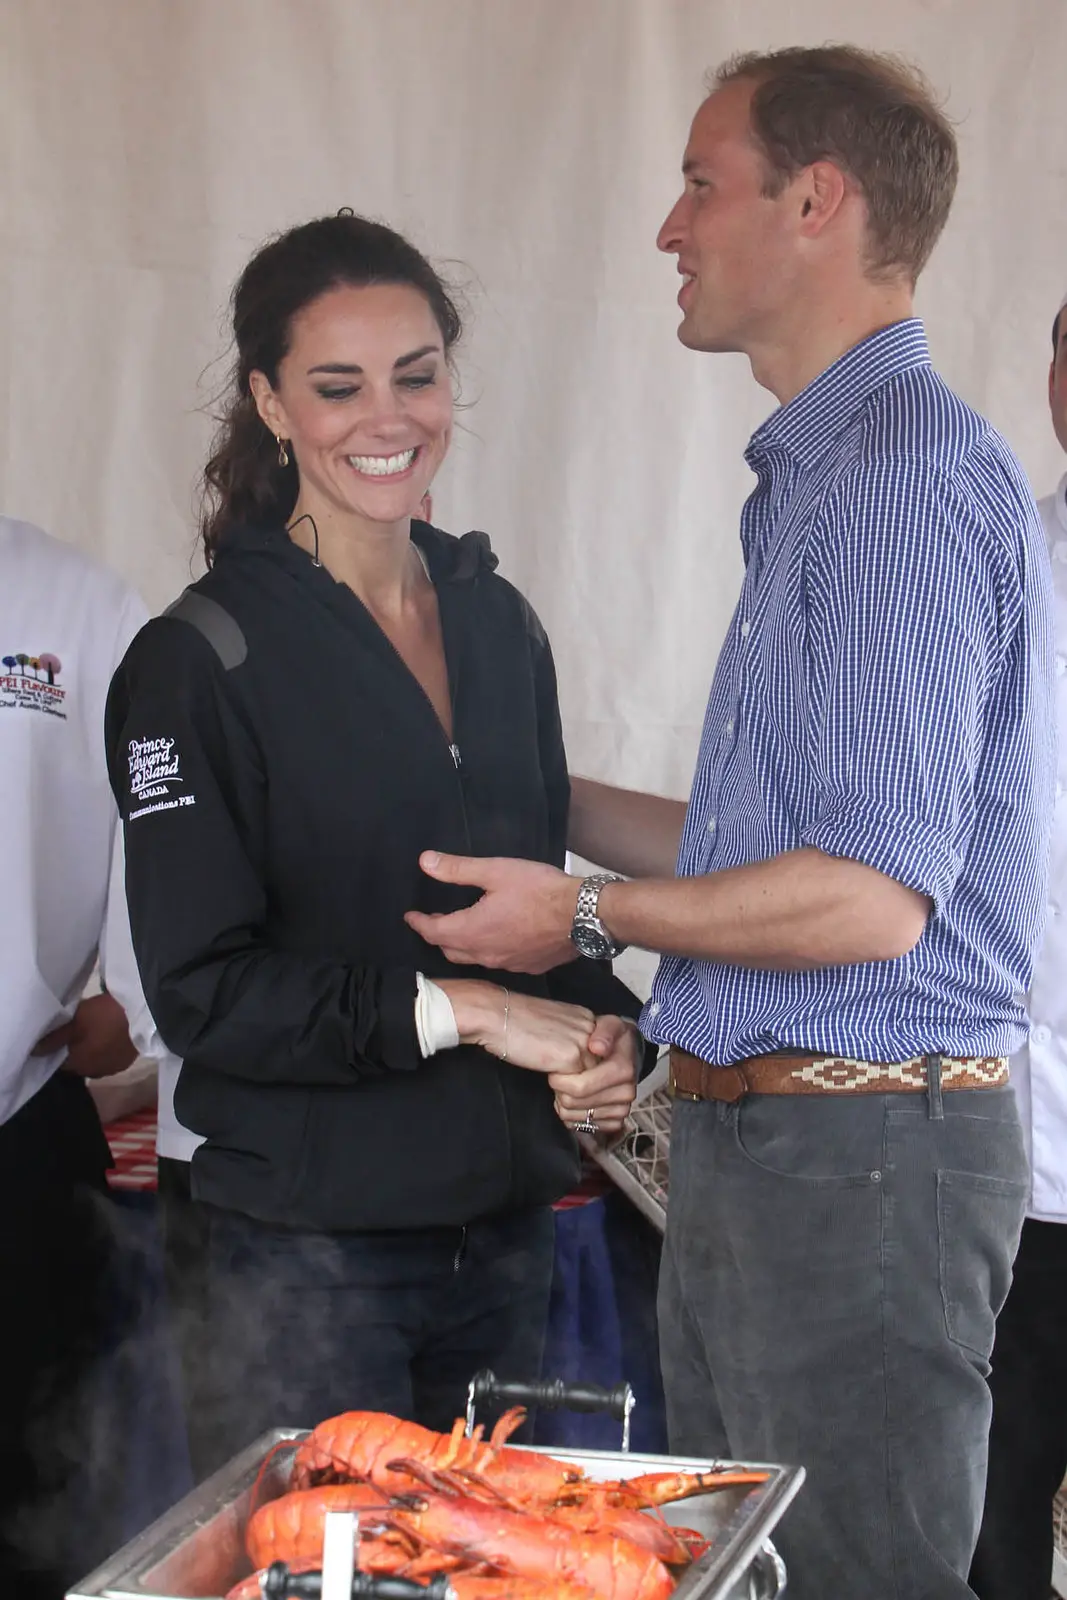 The Duke and Duchess of Cambridge after dragaon boat race